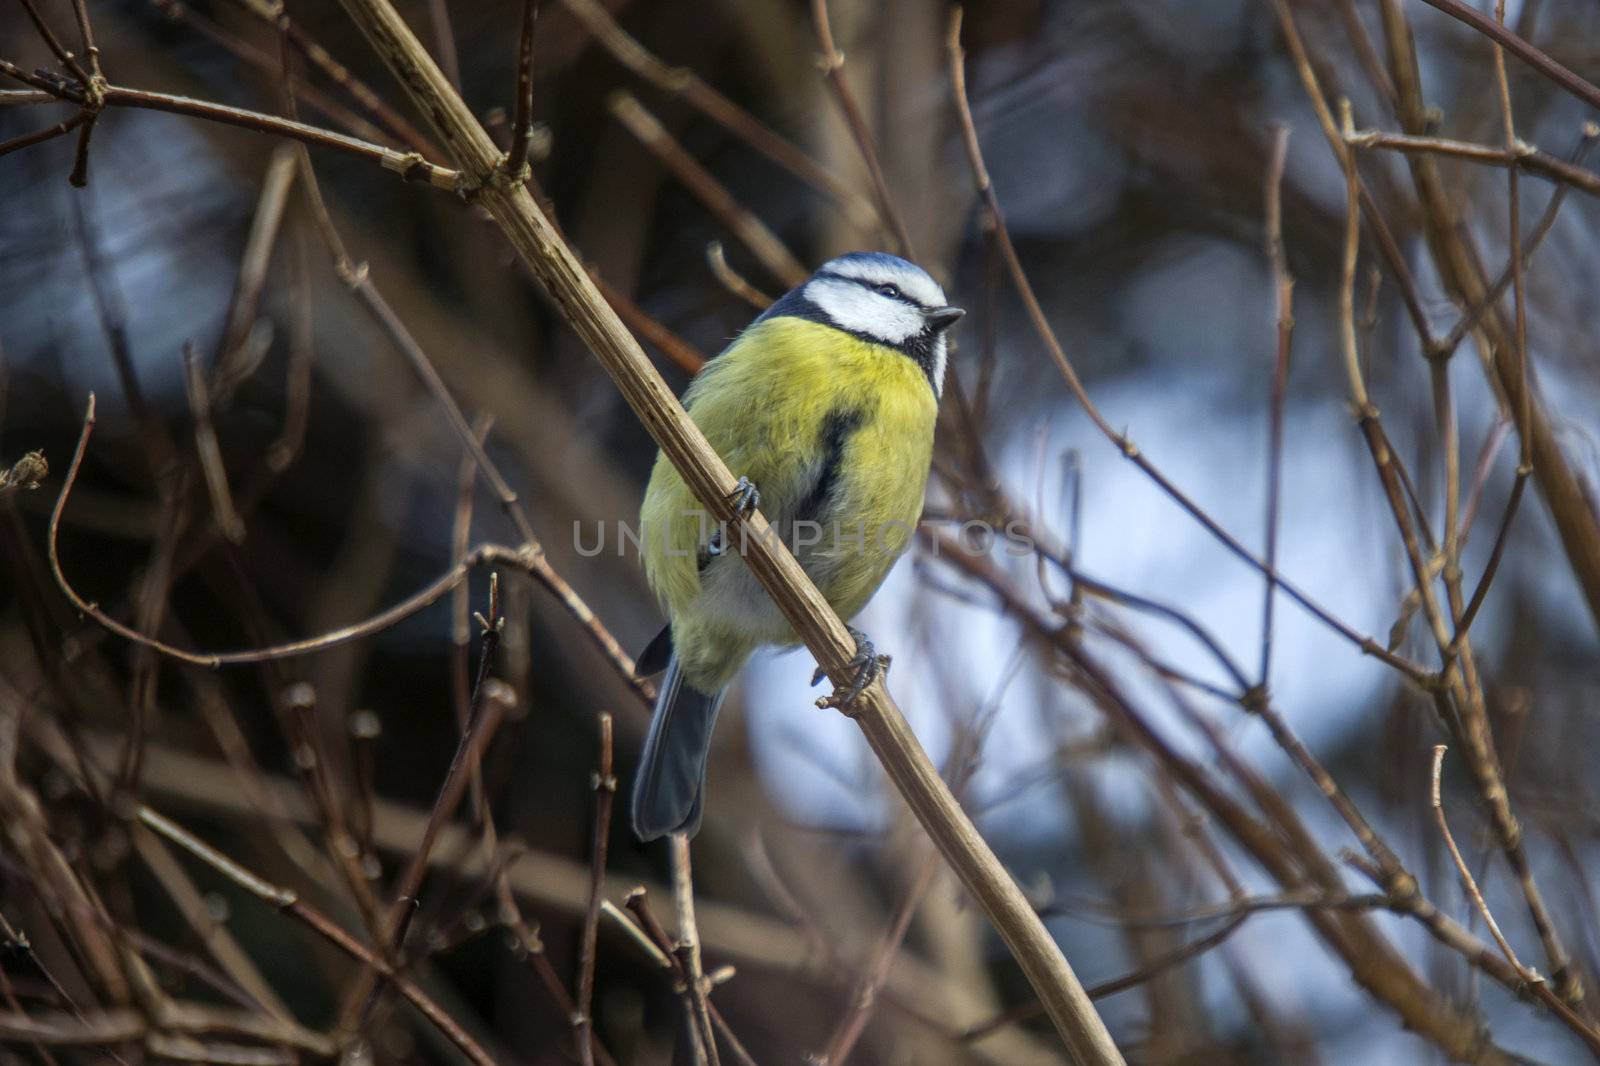 blue tit sitting on a branch in the forest by fredriksten fortress in halden, the picture is shot one day in february 2013